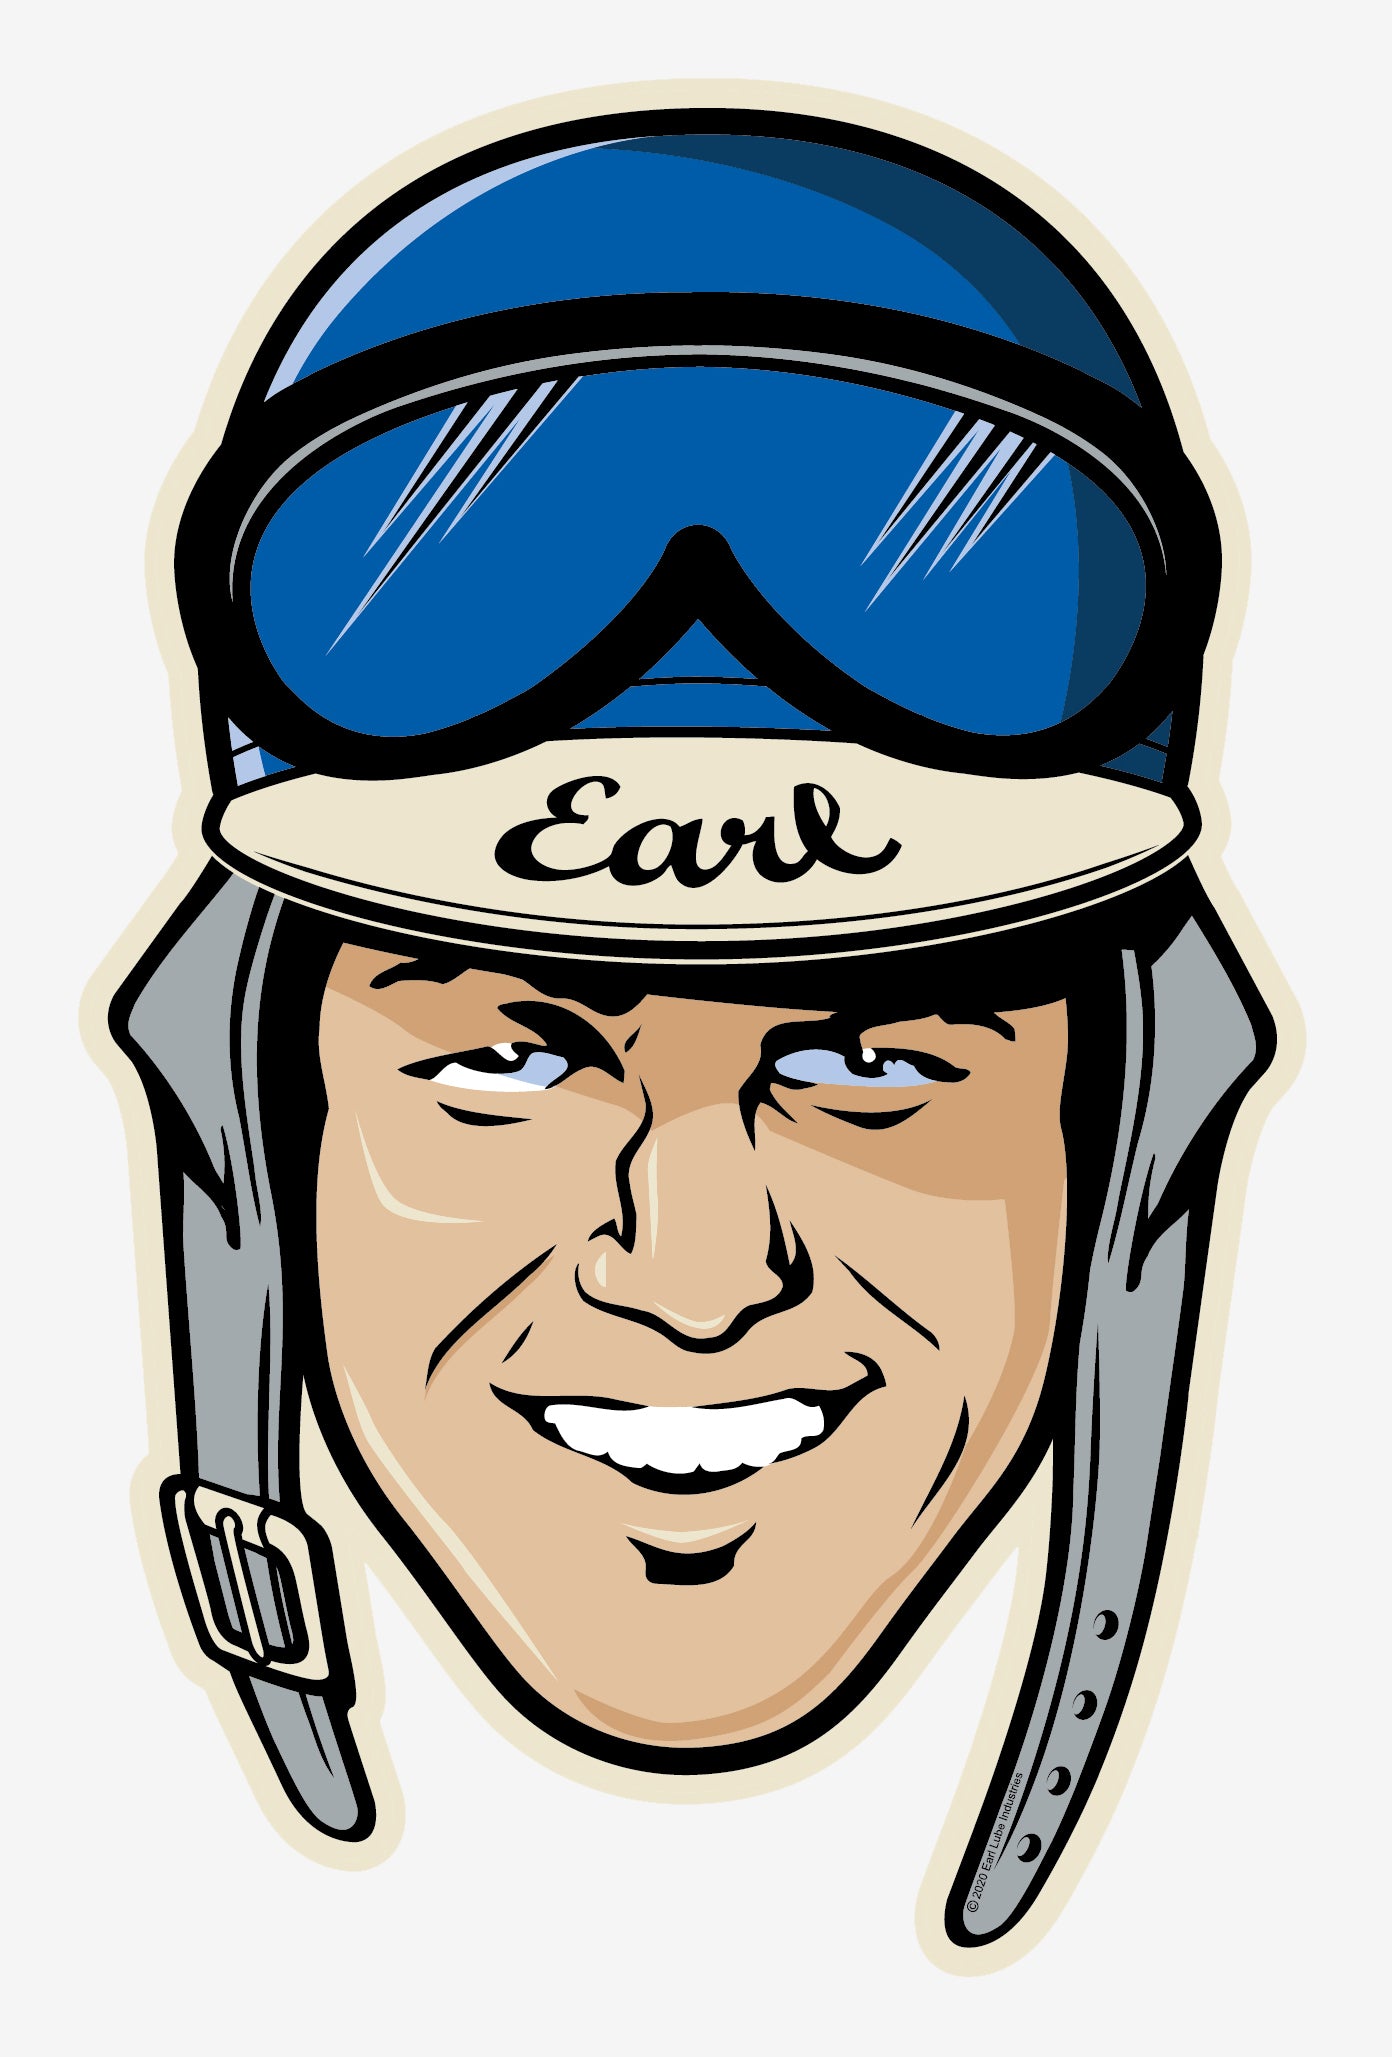 Earl's Face Sticker: Earls handsome face is the reason "All The Girls Love Earl."